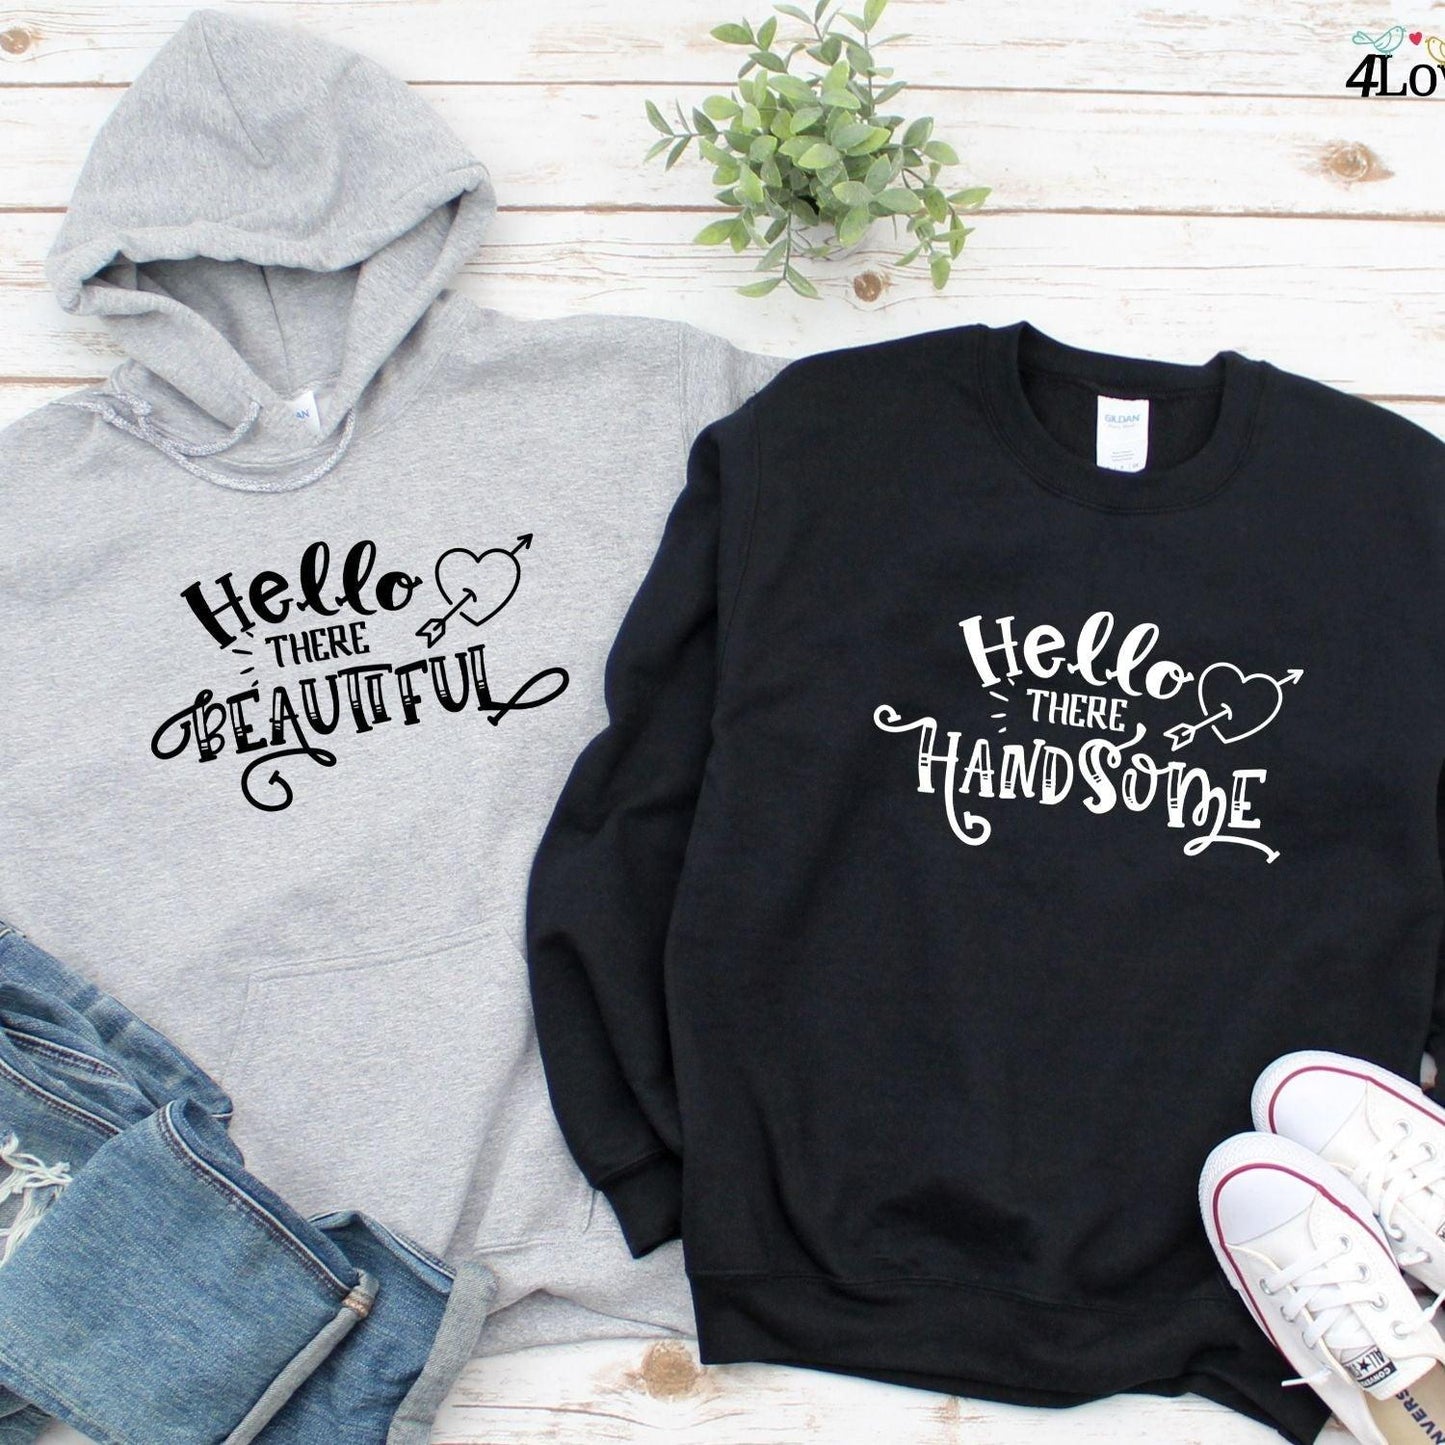 Matching Outfits for Couples: "Hello Beautiful/Handsome" - Perfect Valentine's Day Gift! - 4Lovebirds